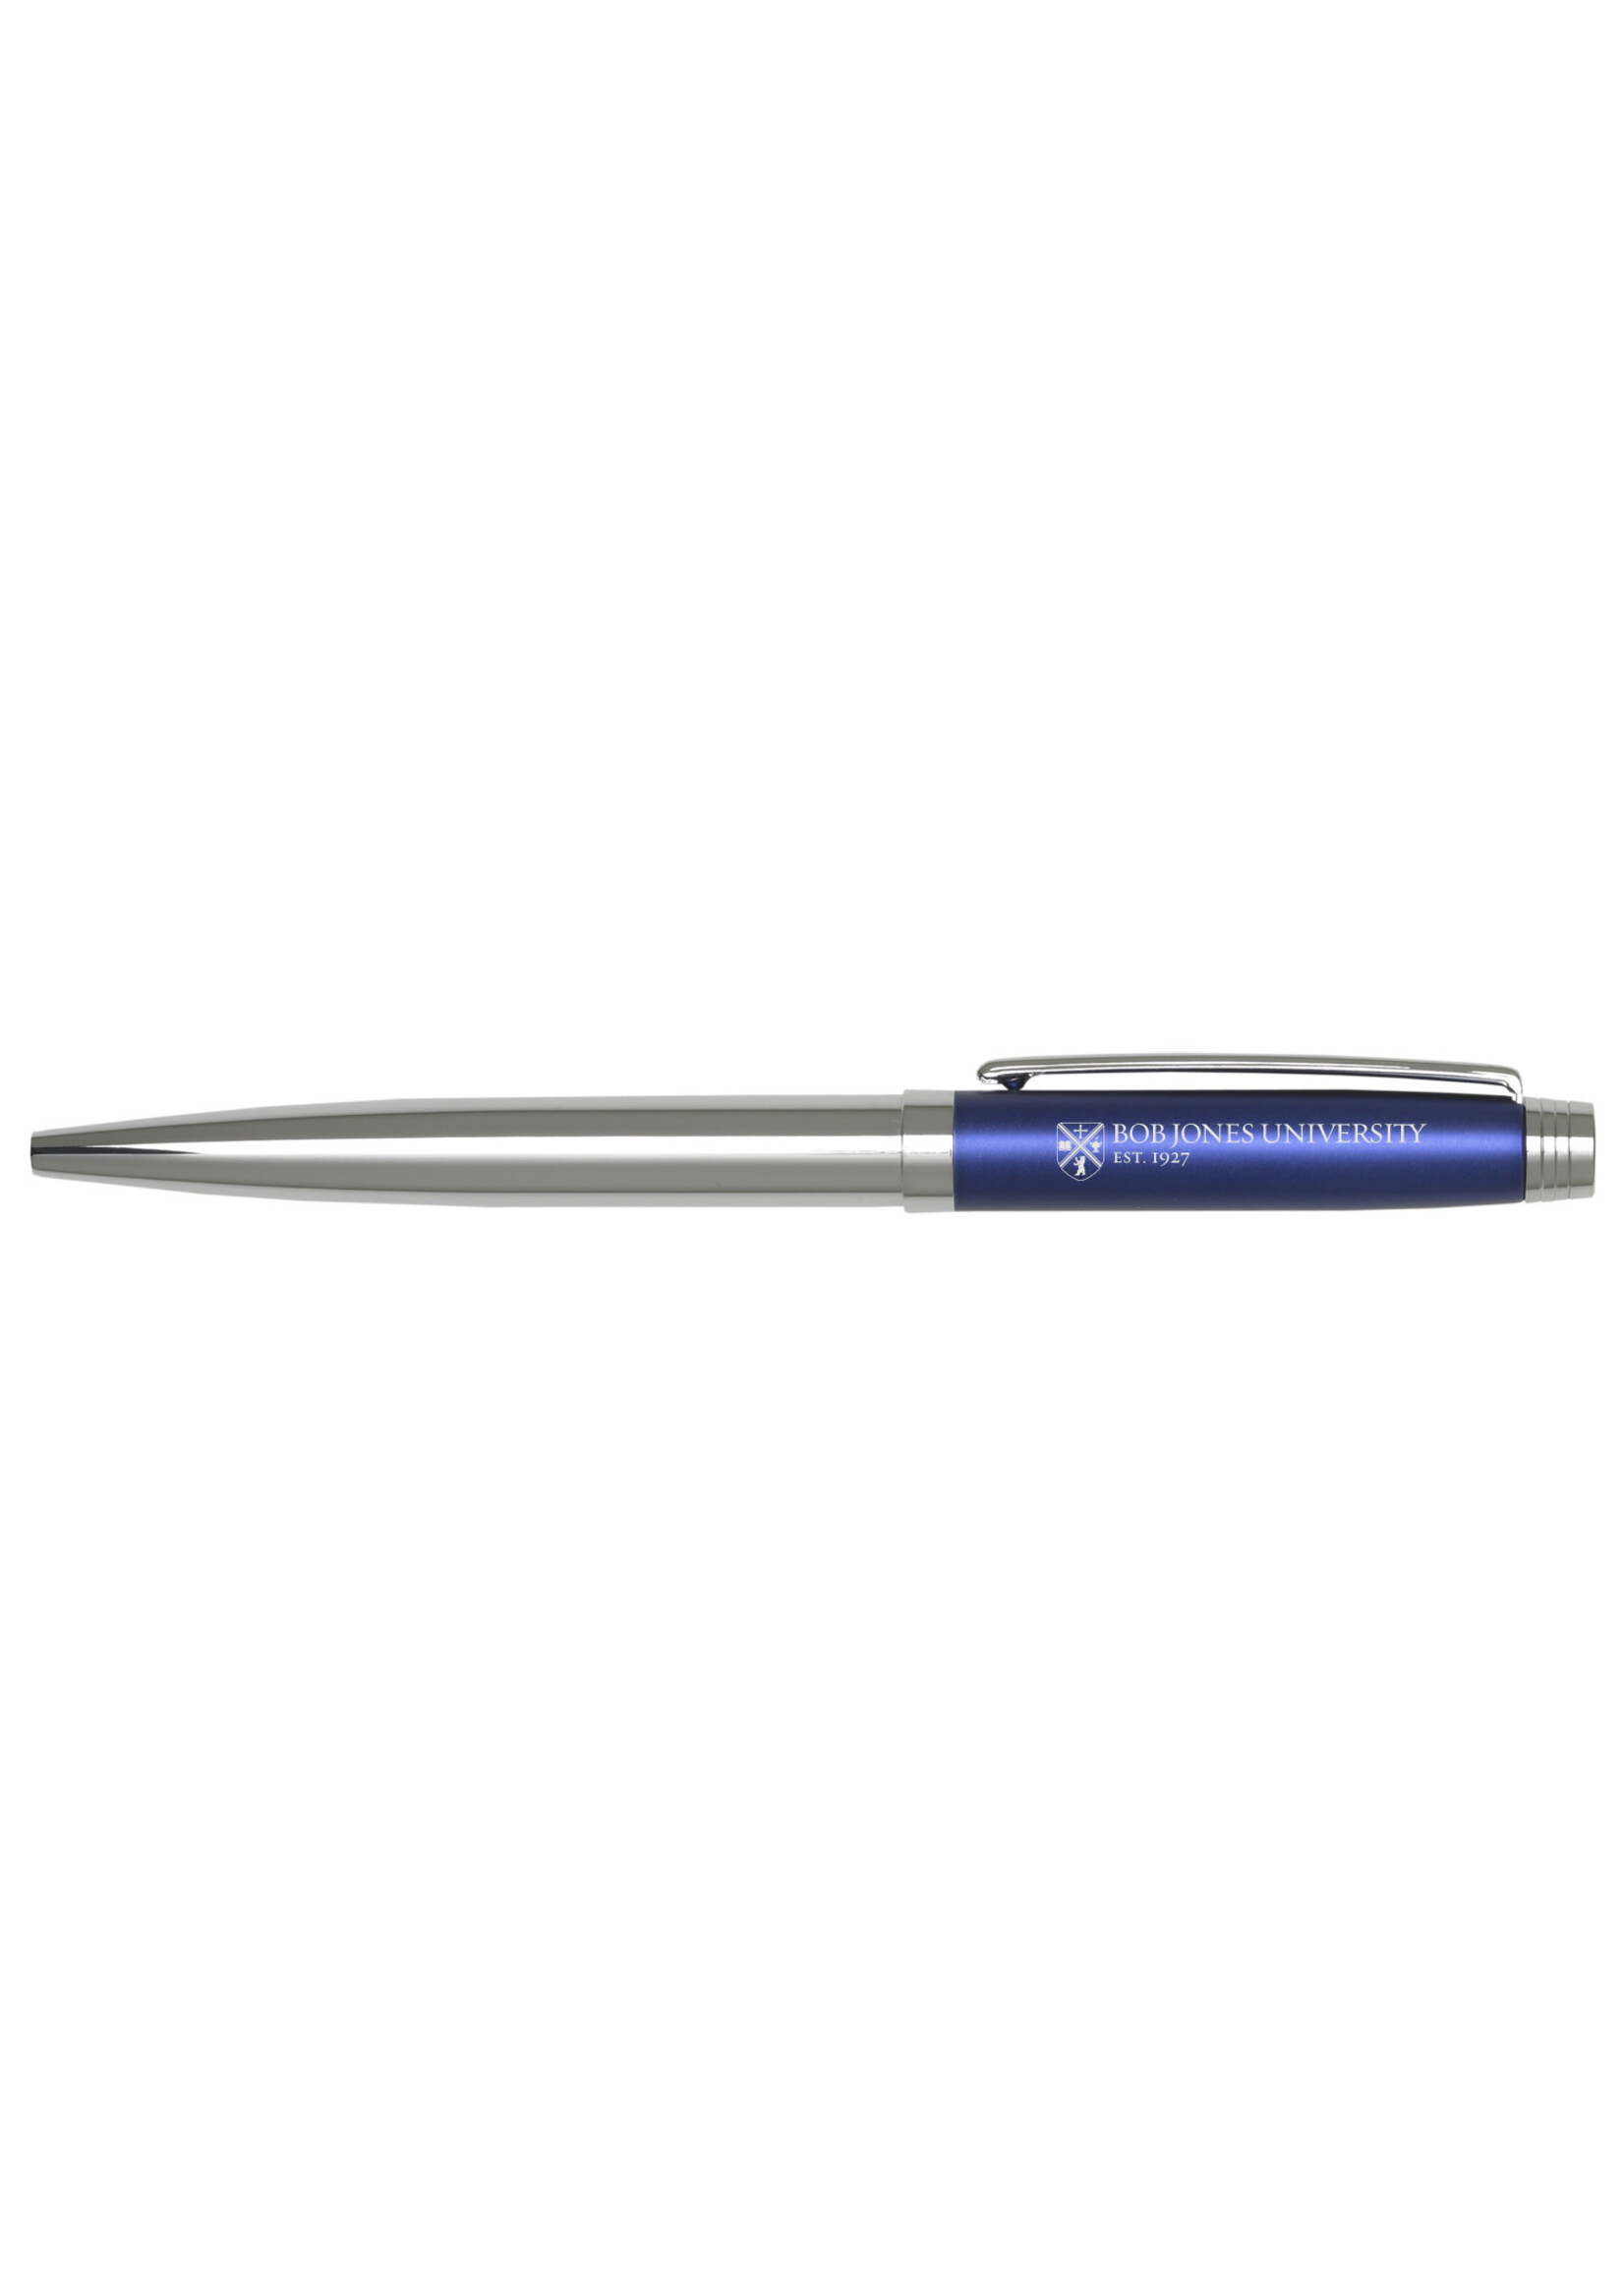 BJU Shield Slim Chrome & Color Ballpoint Pen  (Silver with Blue)-Black Ink